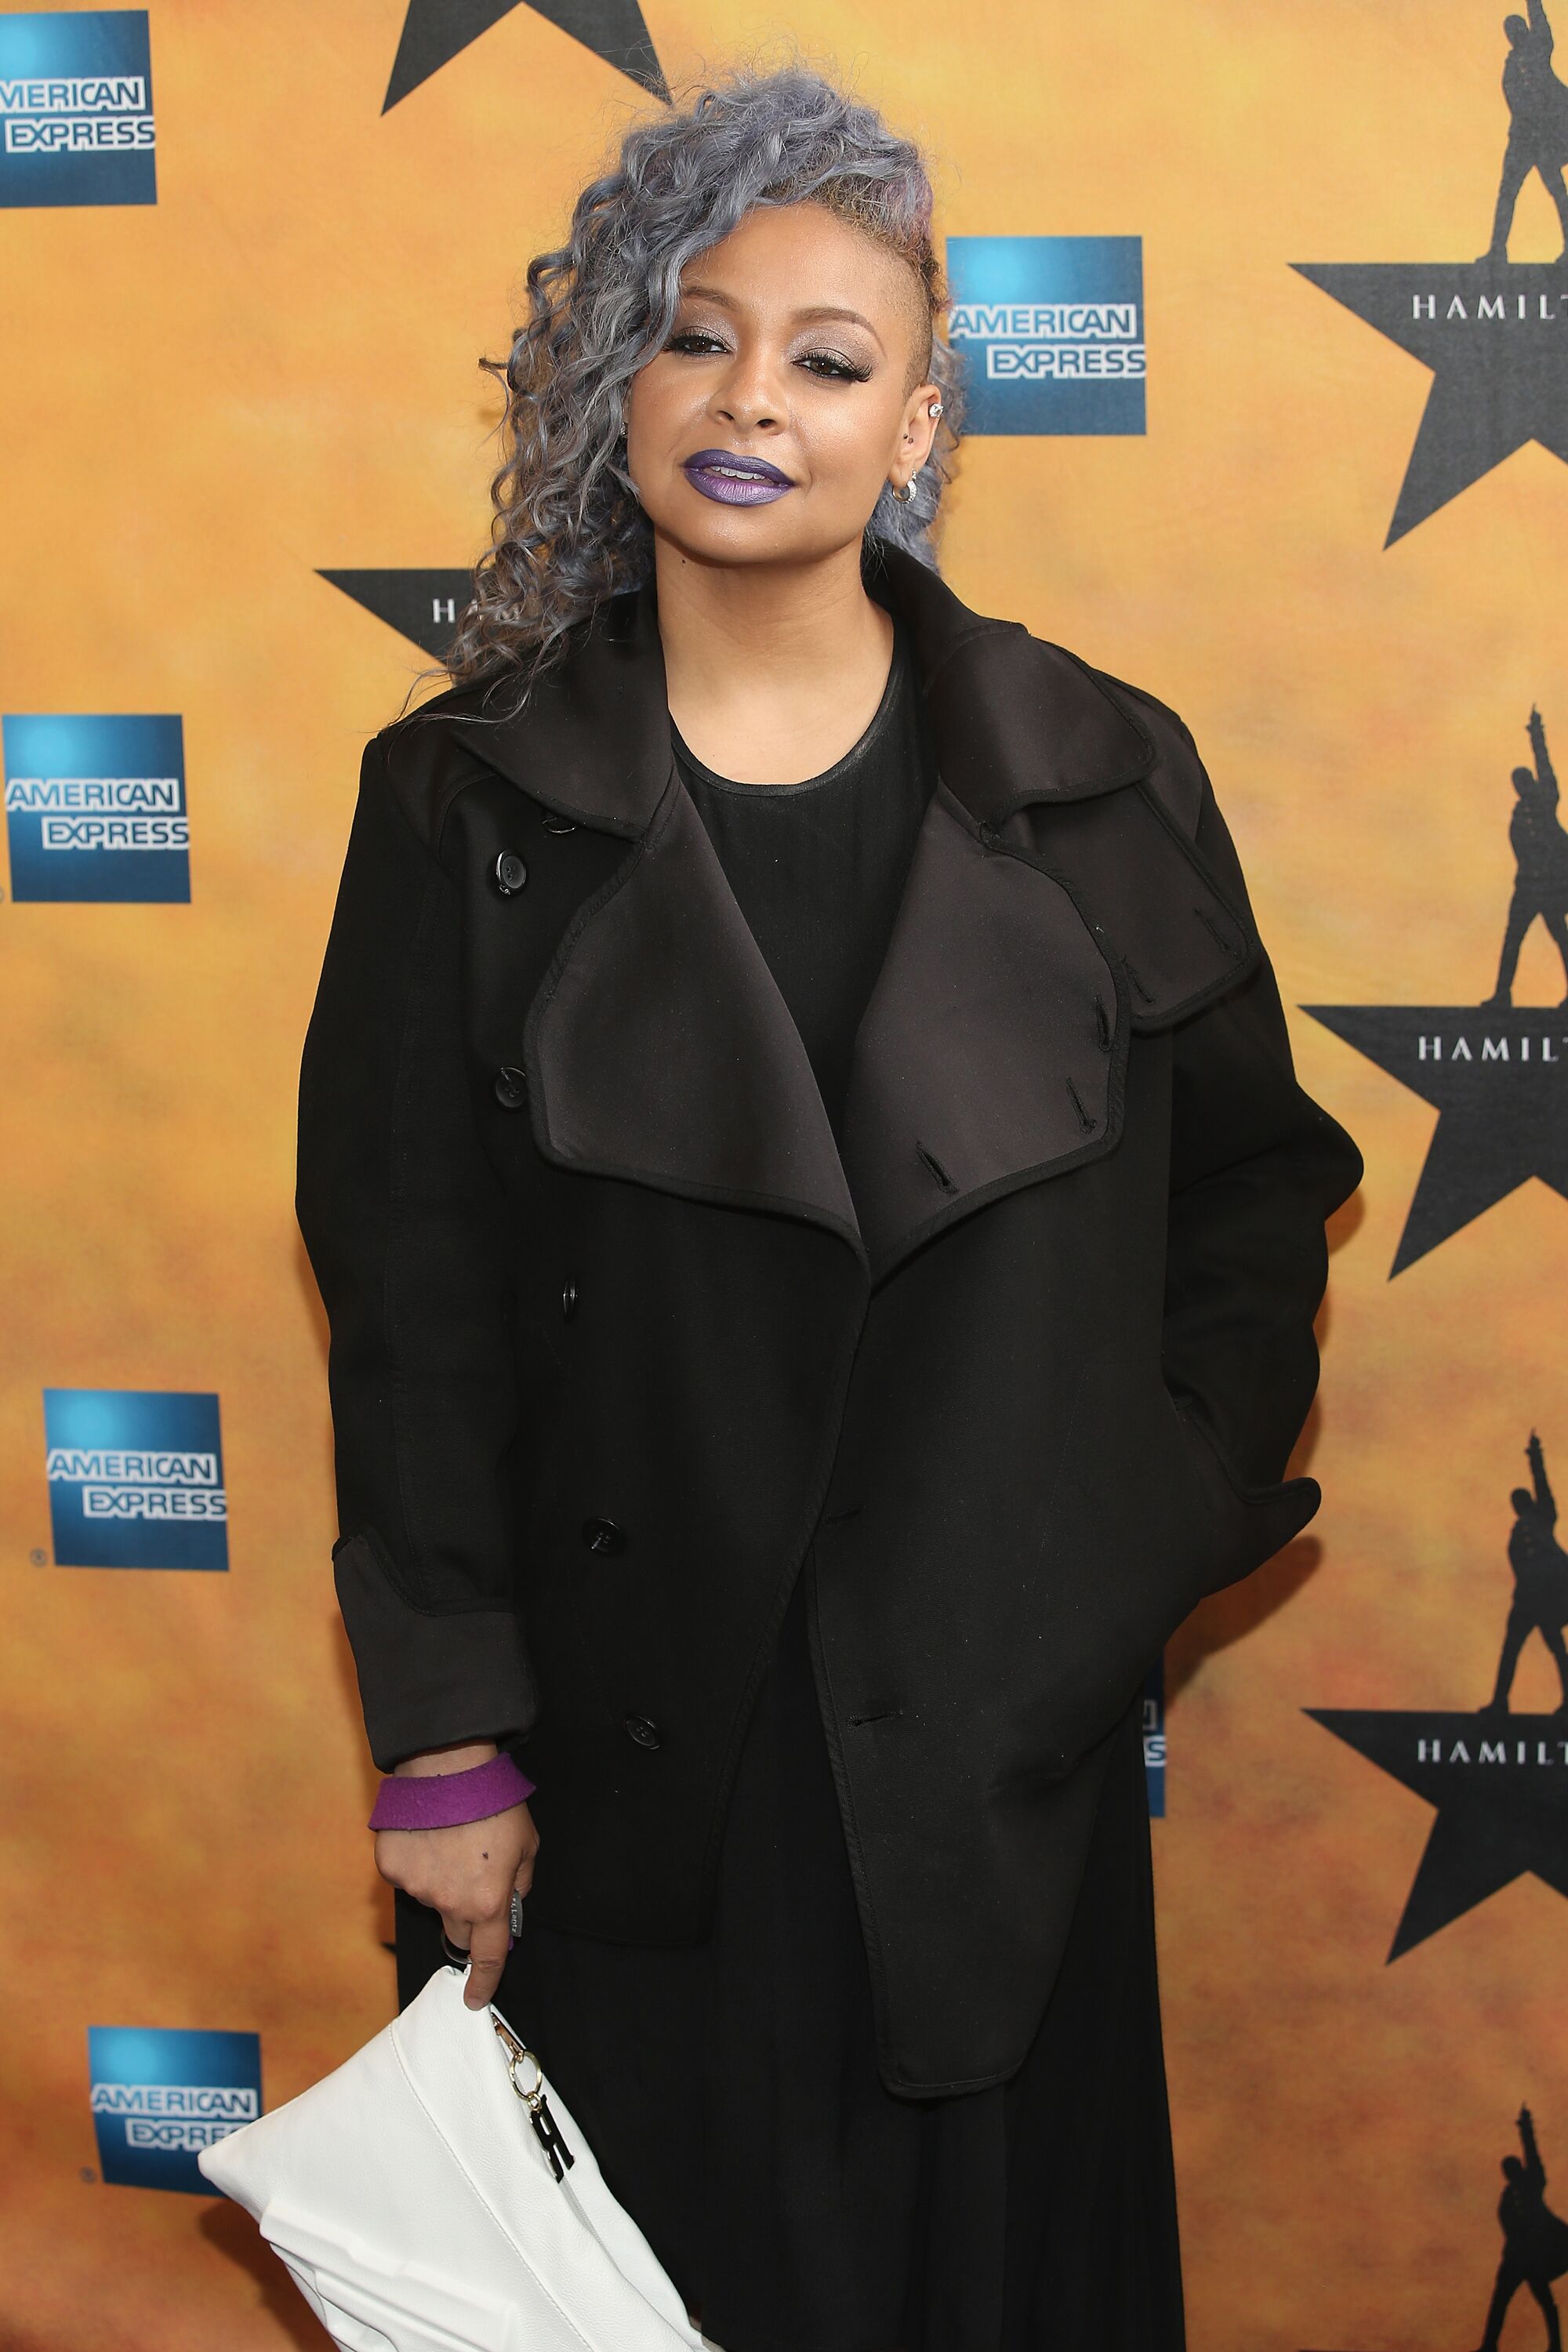 Raven-Symoné attends "Hamilton" Broadway Opening Night at Richard Rodgers Theatre on August 6, 2015 in New York City. | Source: Getty Images